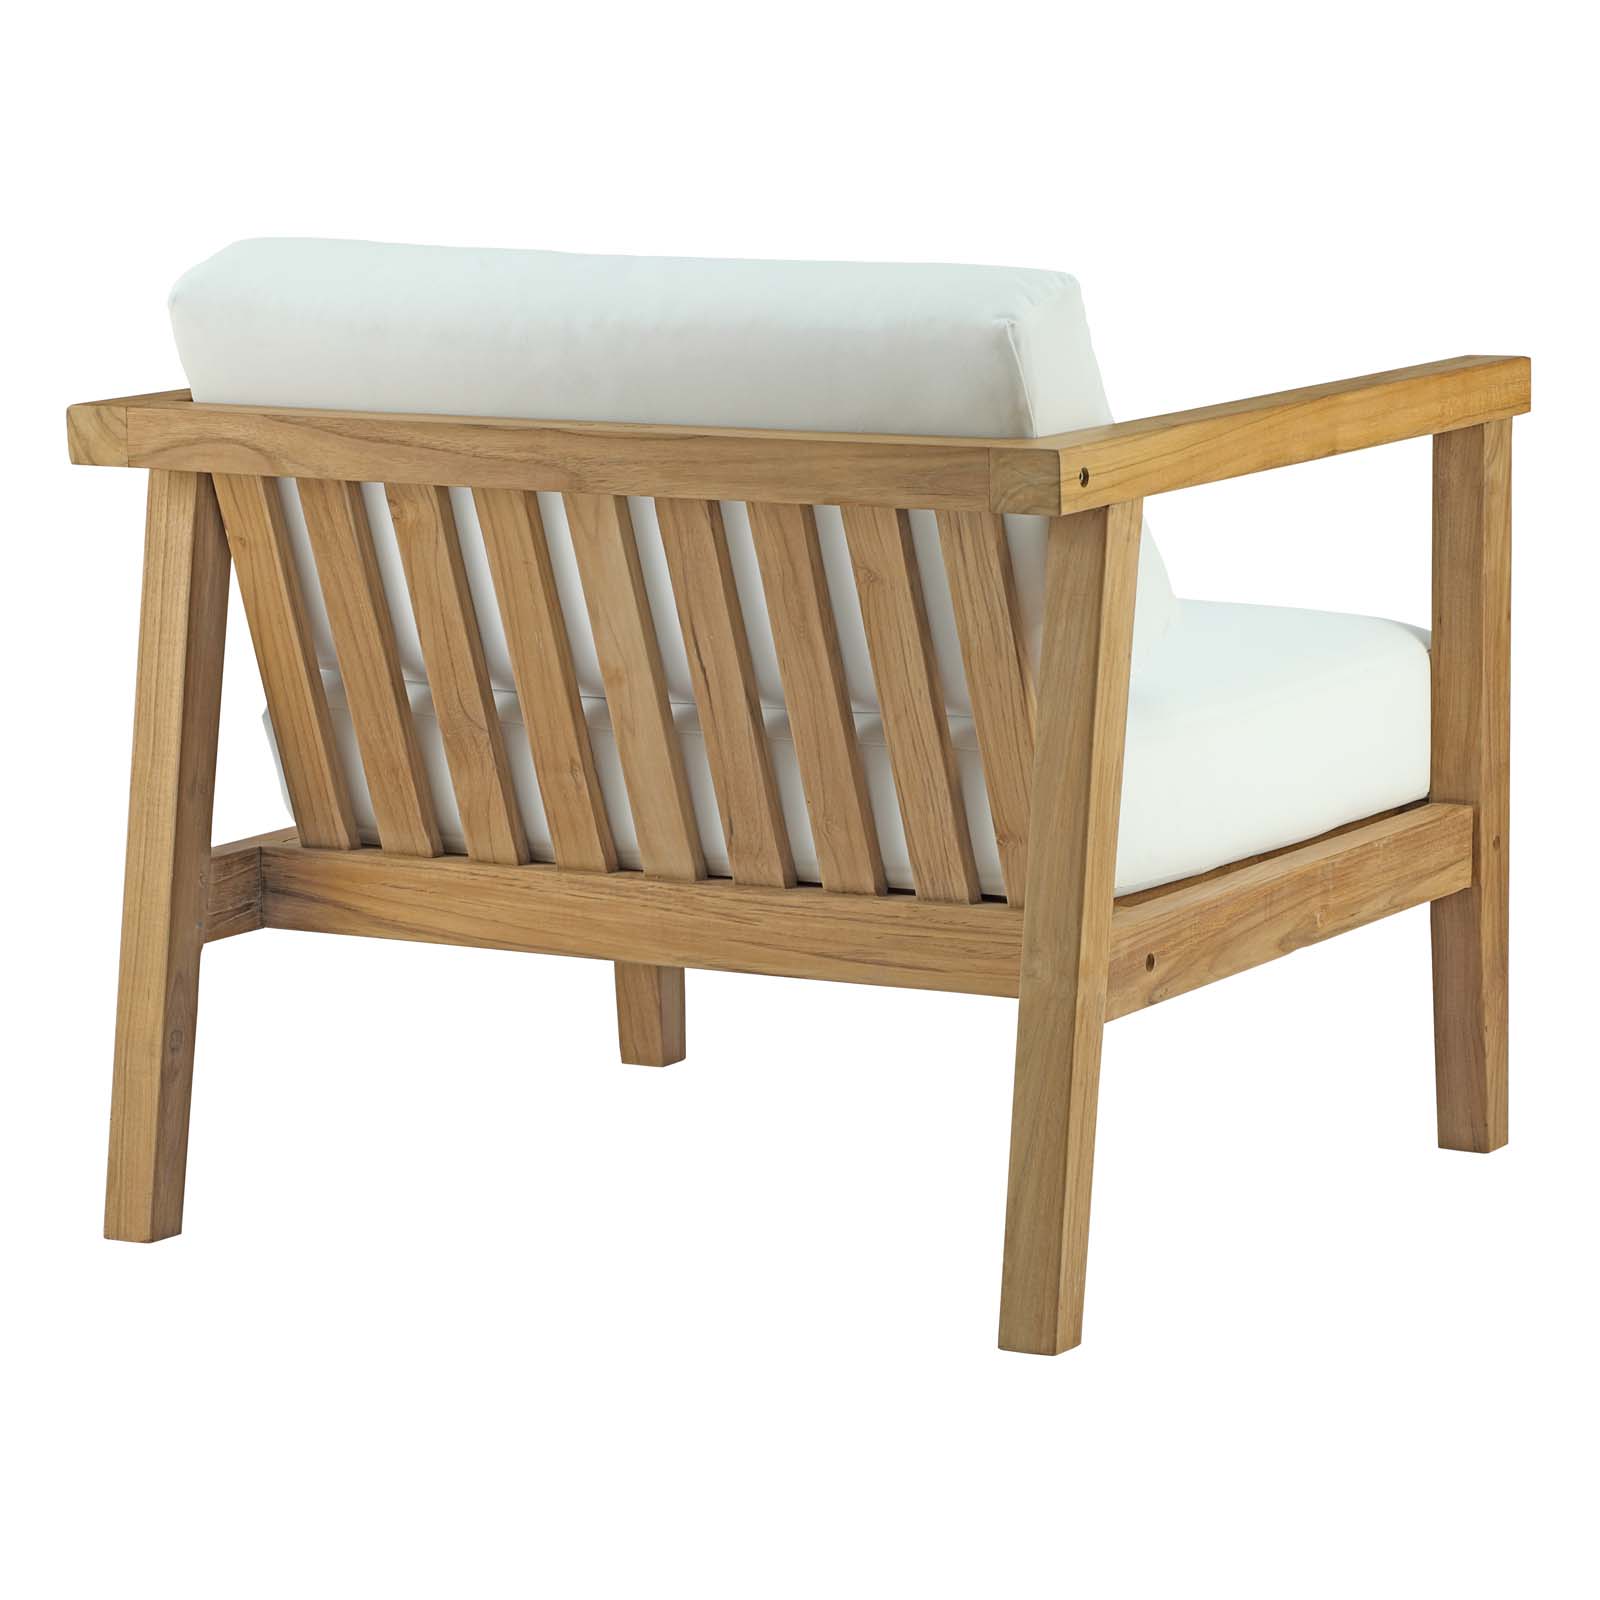 Modway Bayport Outdoor Patio Teak Armchair in Natural White - image 5 of 6